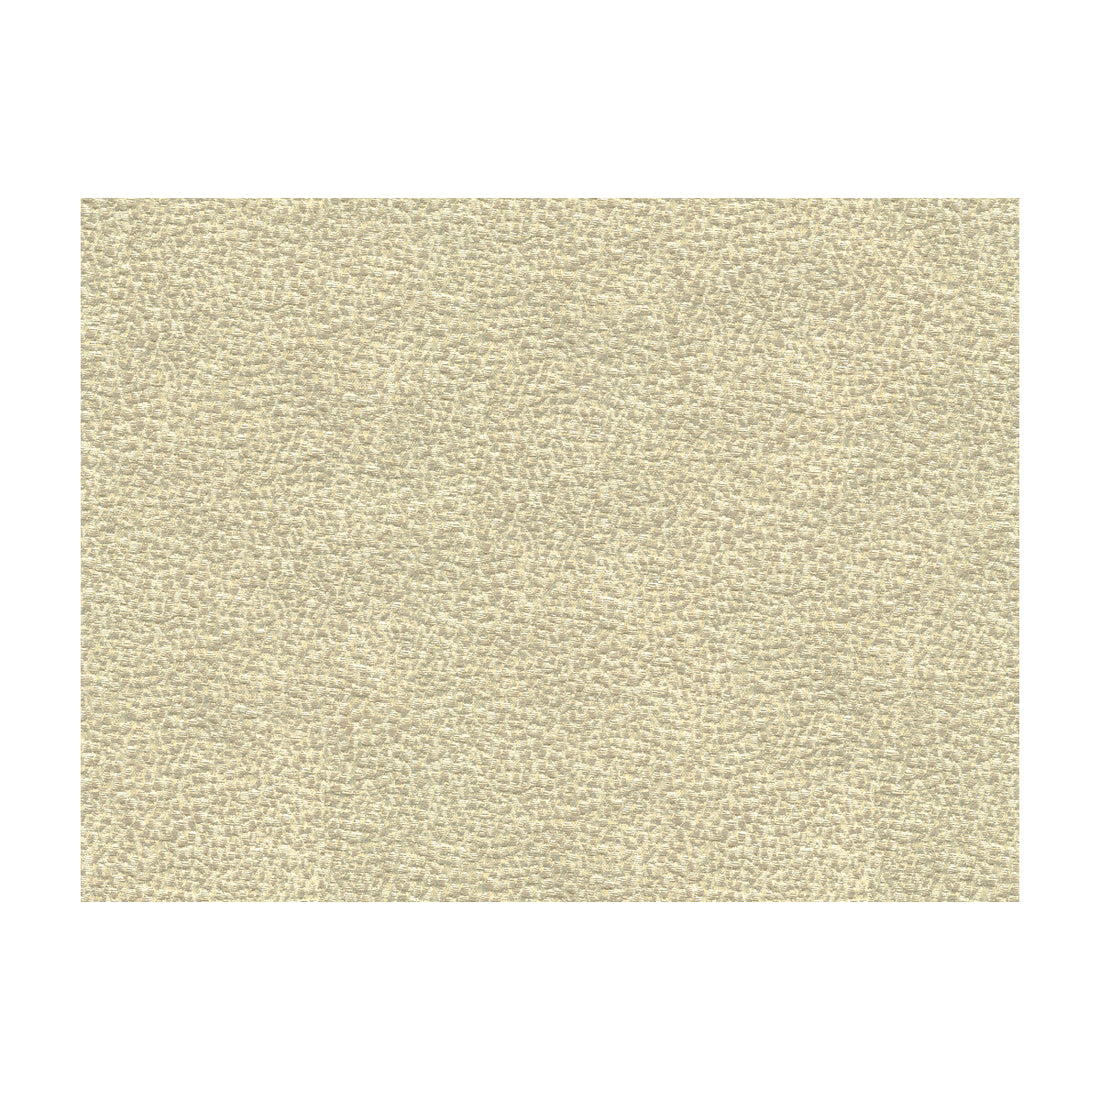 Shagreen Luxury fabric in platinum color - pattern 33456.11.0 - by Kravet Couture in the Modern Luxe collection